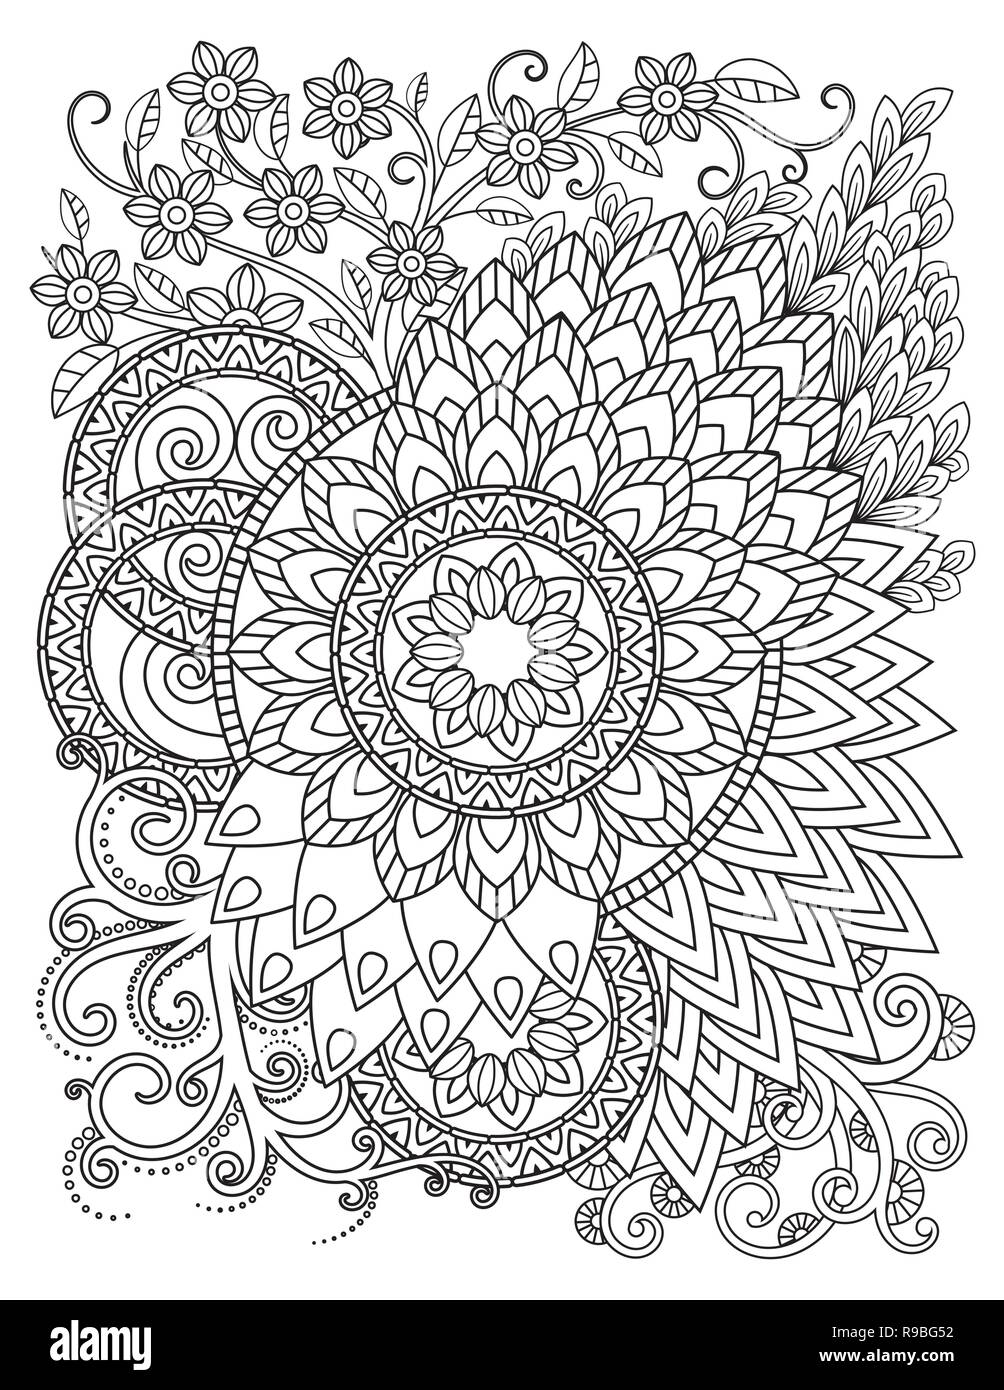 Mandala pattern in black and white. Adult coloring book page with mandalas. Oriental pattern, vintage decorative ornaments. Hand drawn vector illustration. Design element Stock Vector